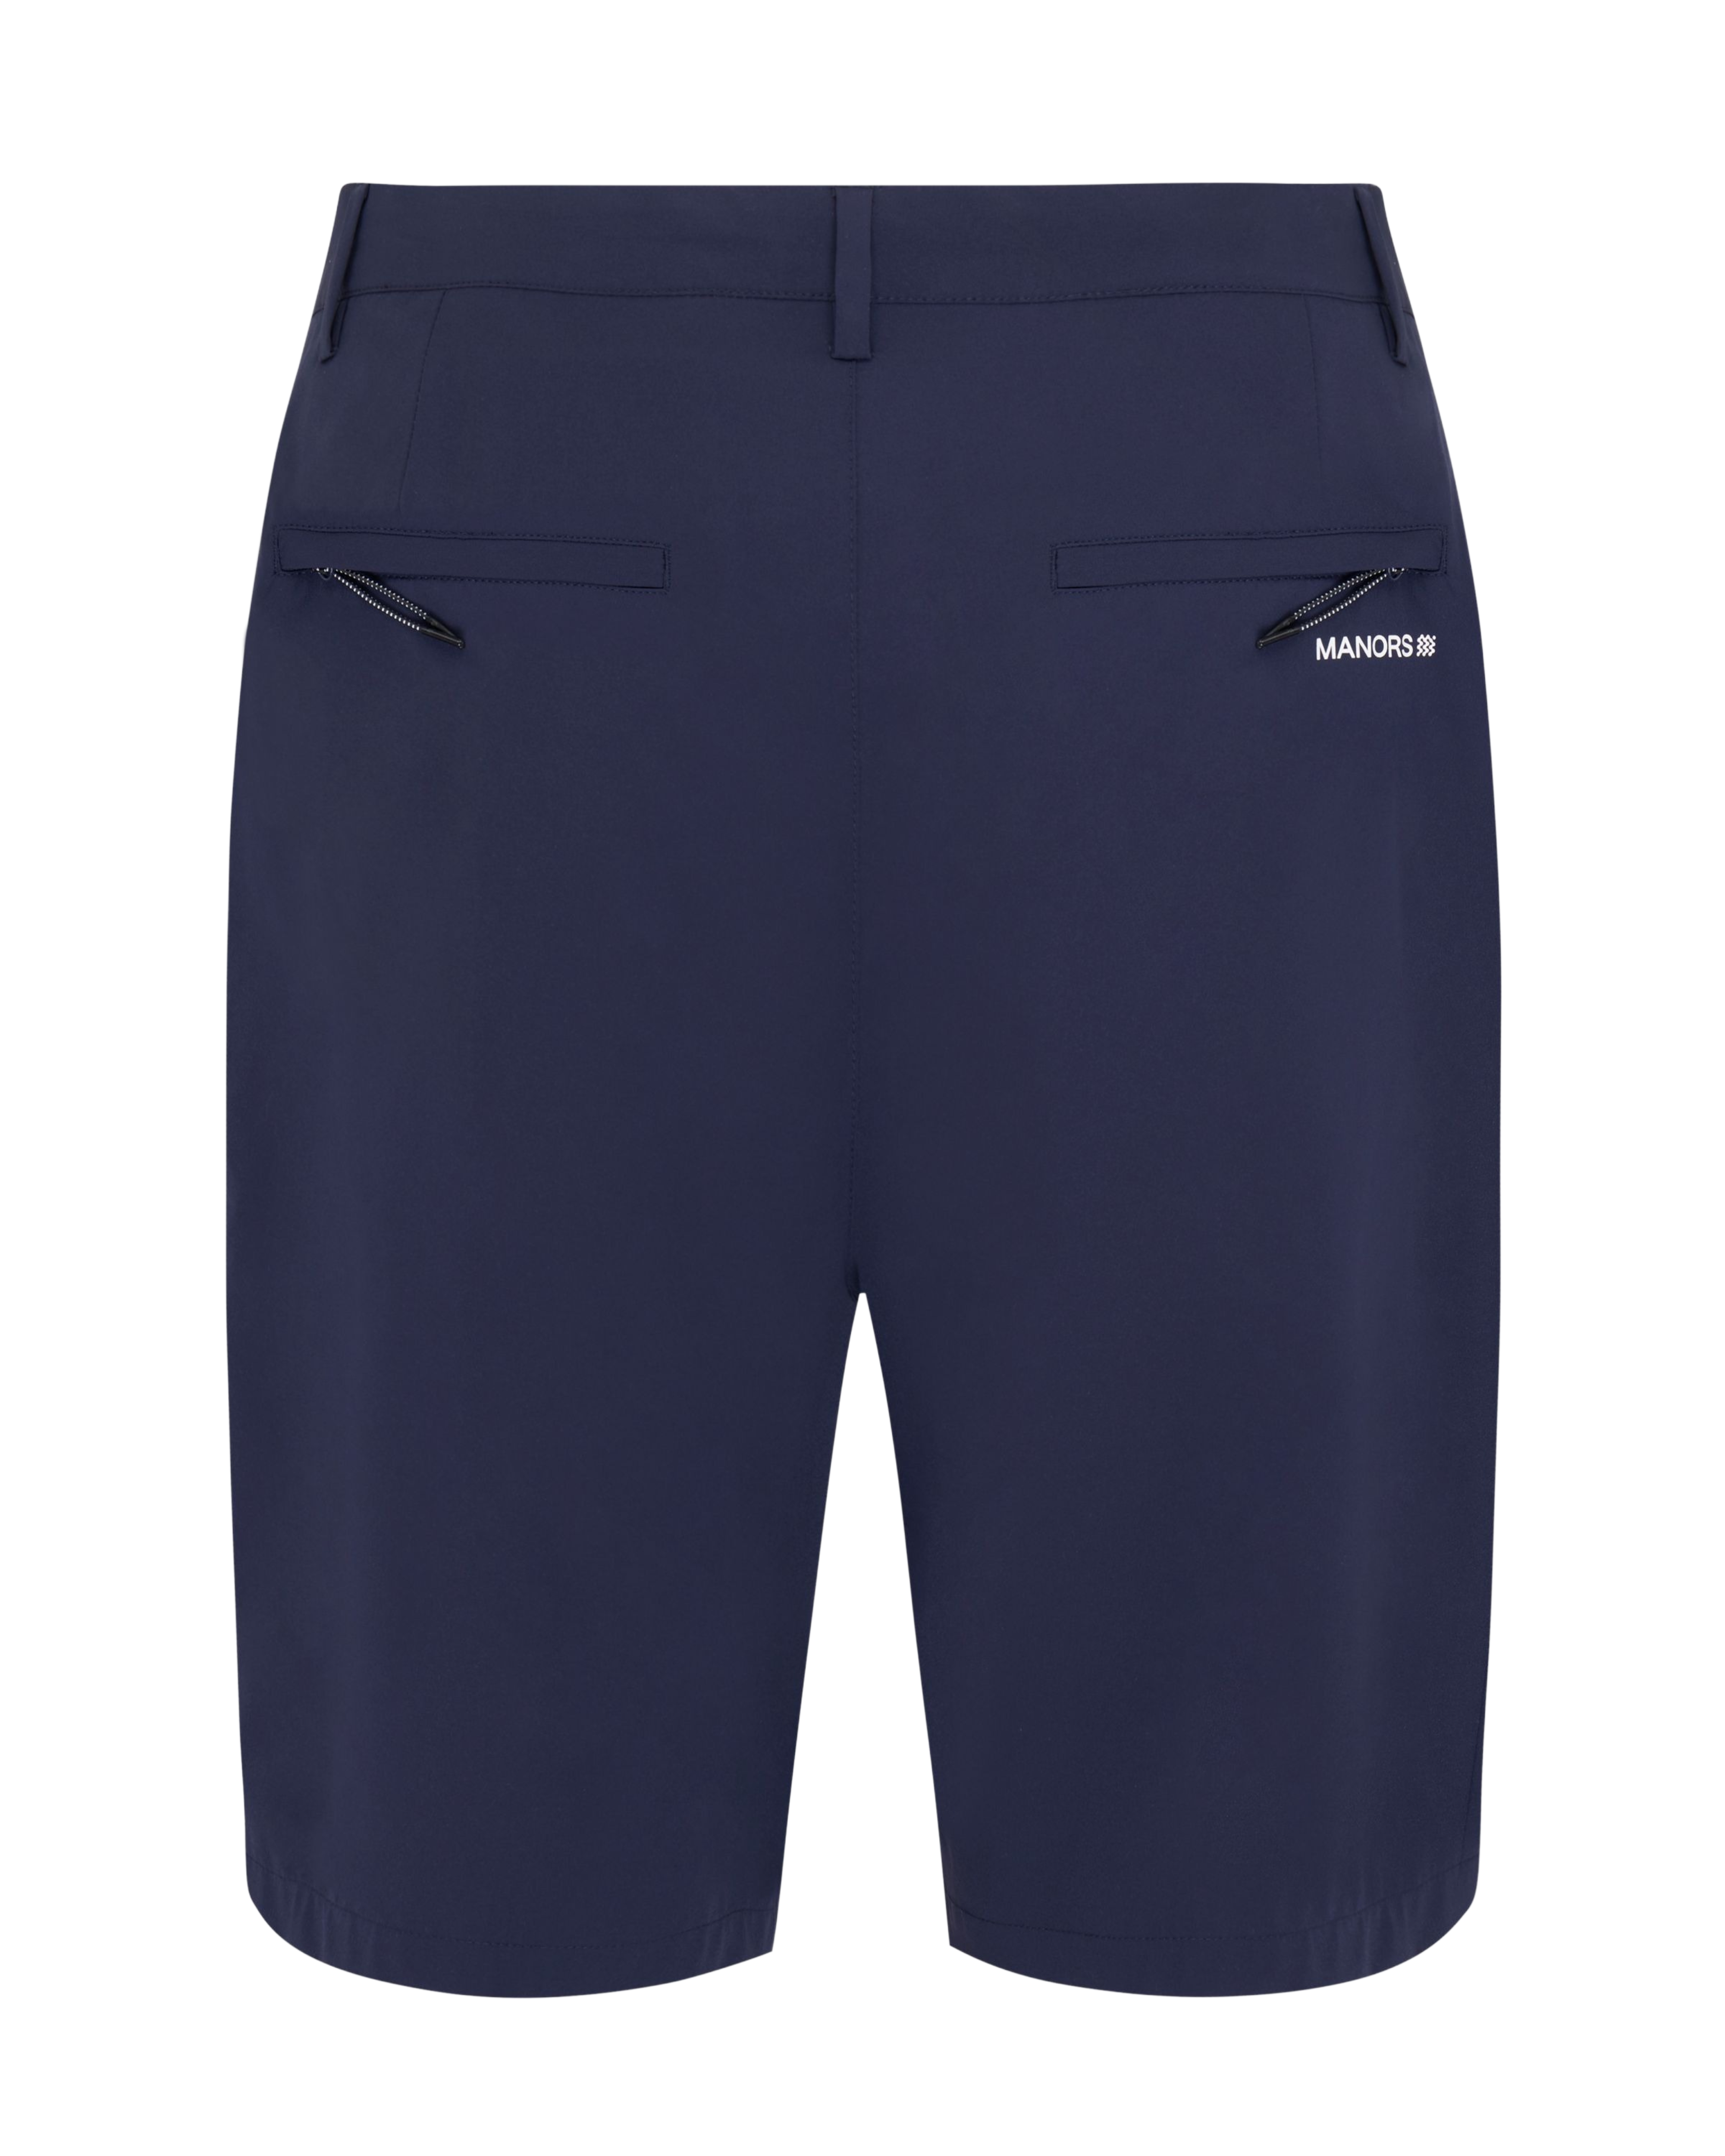 MANORS Men's Lightweight Course Short | golf and sports fashion brands at agorabkk 